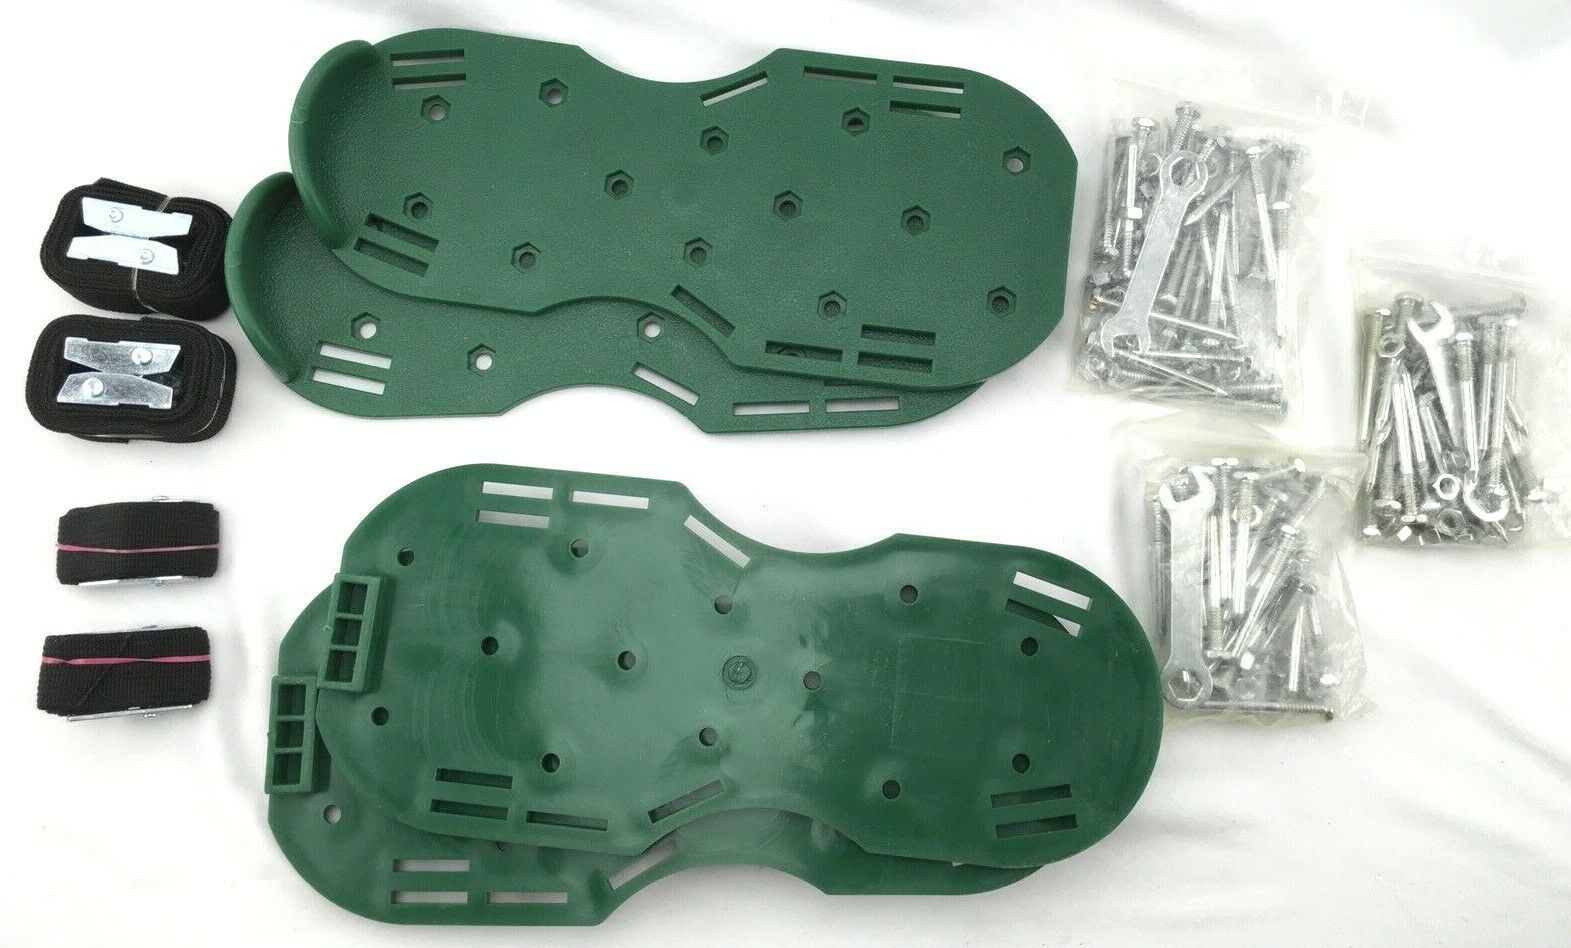 Timesetl Lawn Aerator Shoes/Sandals Grass Aerating Steel Spikes PARTS